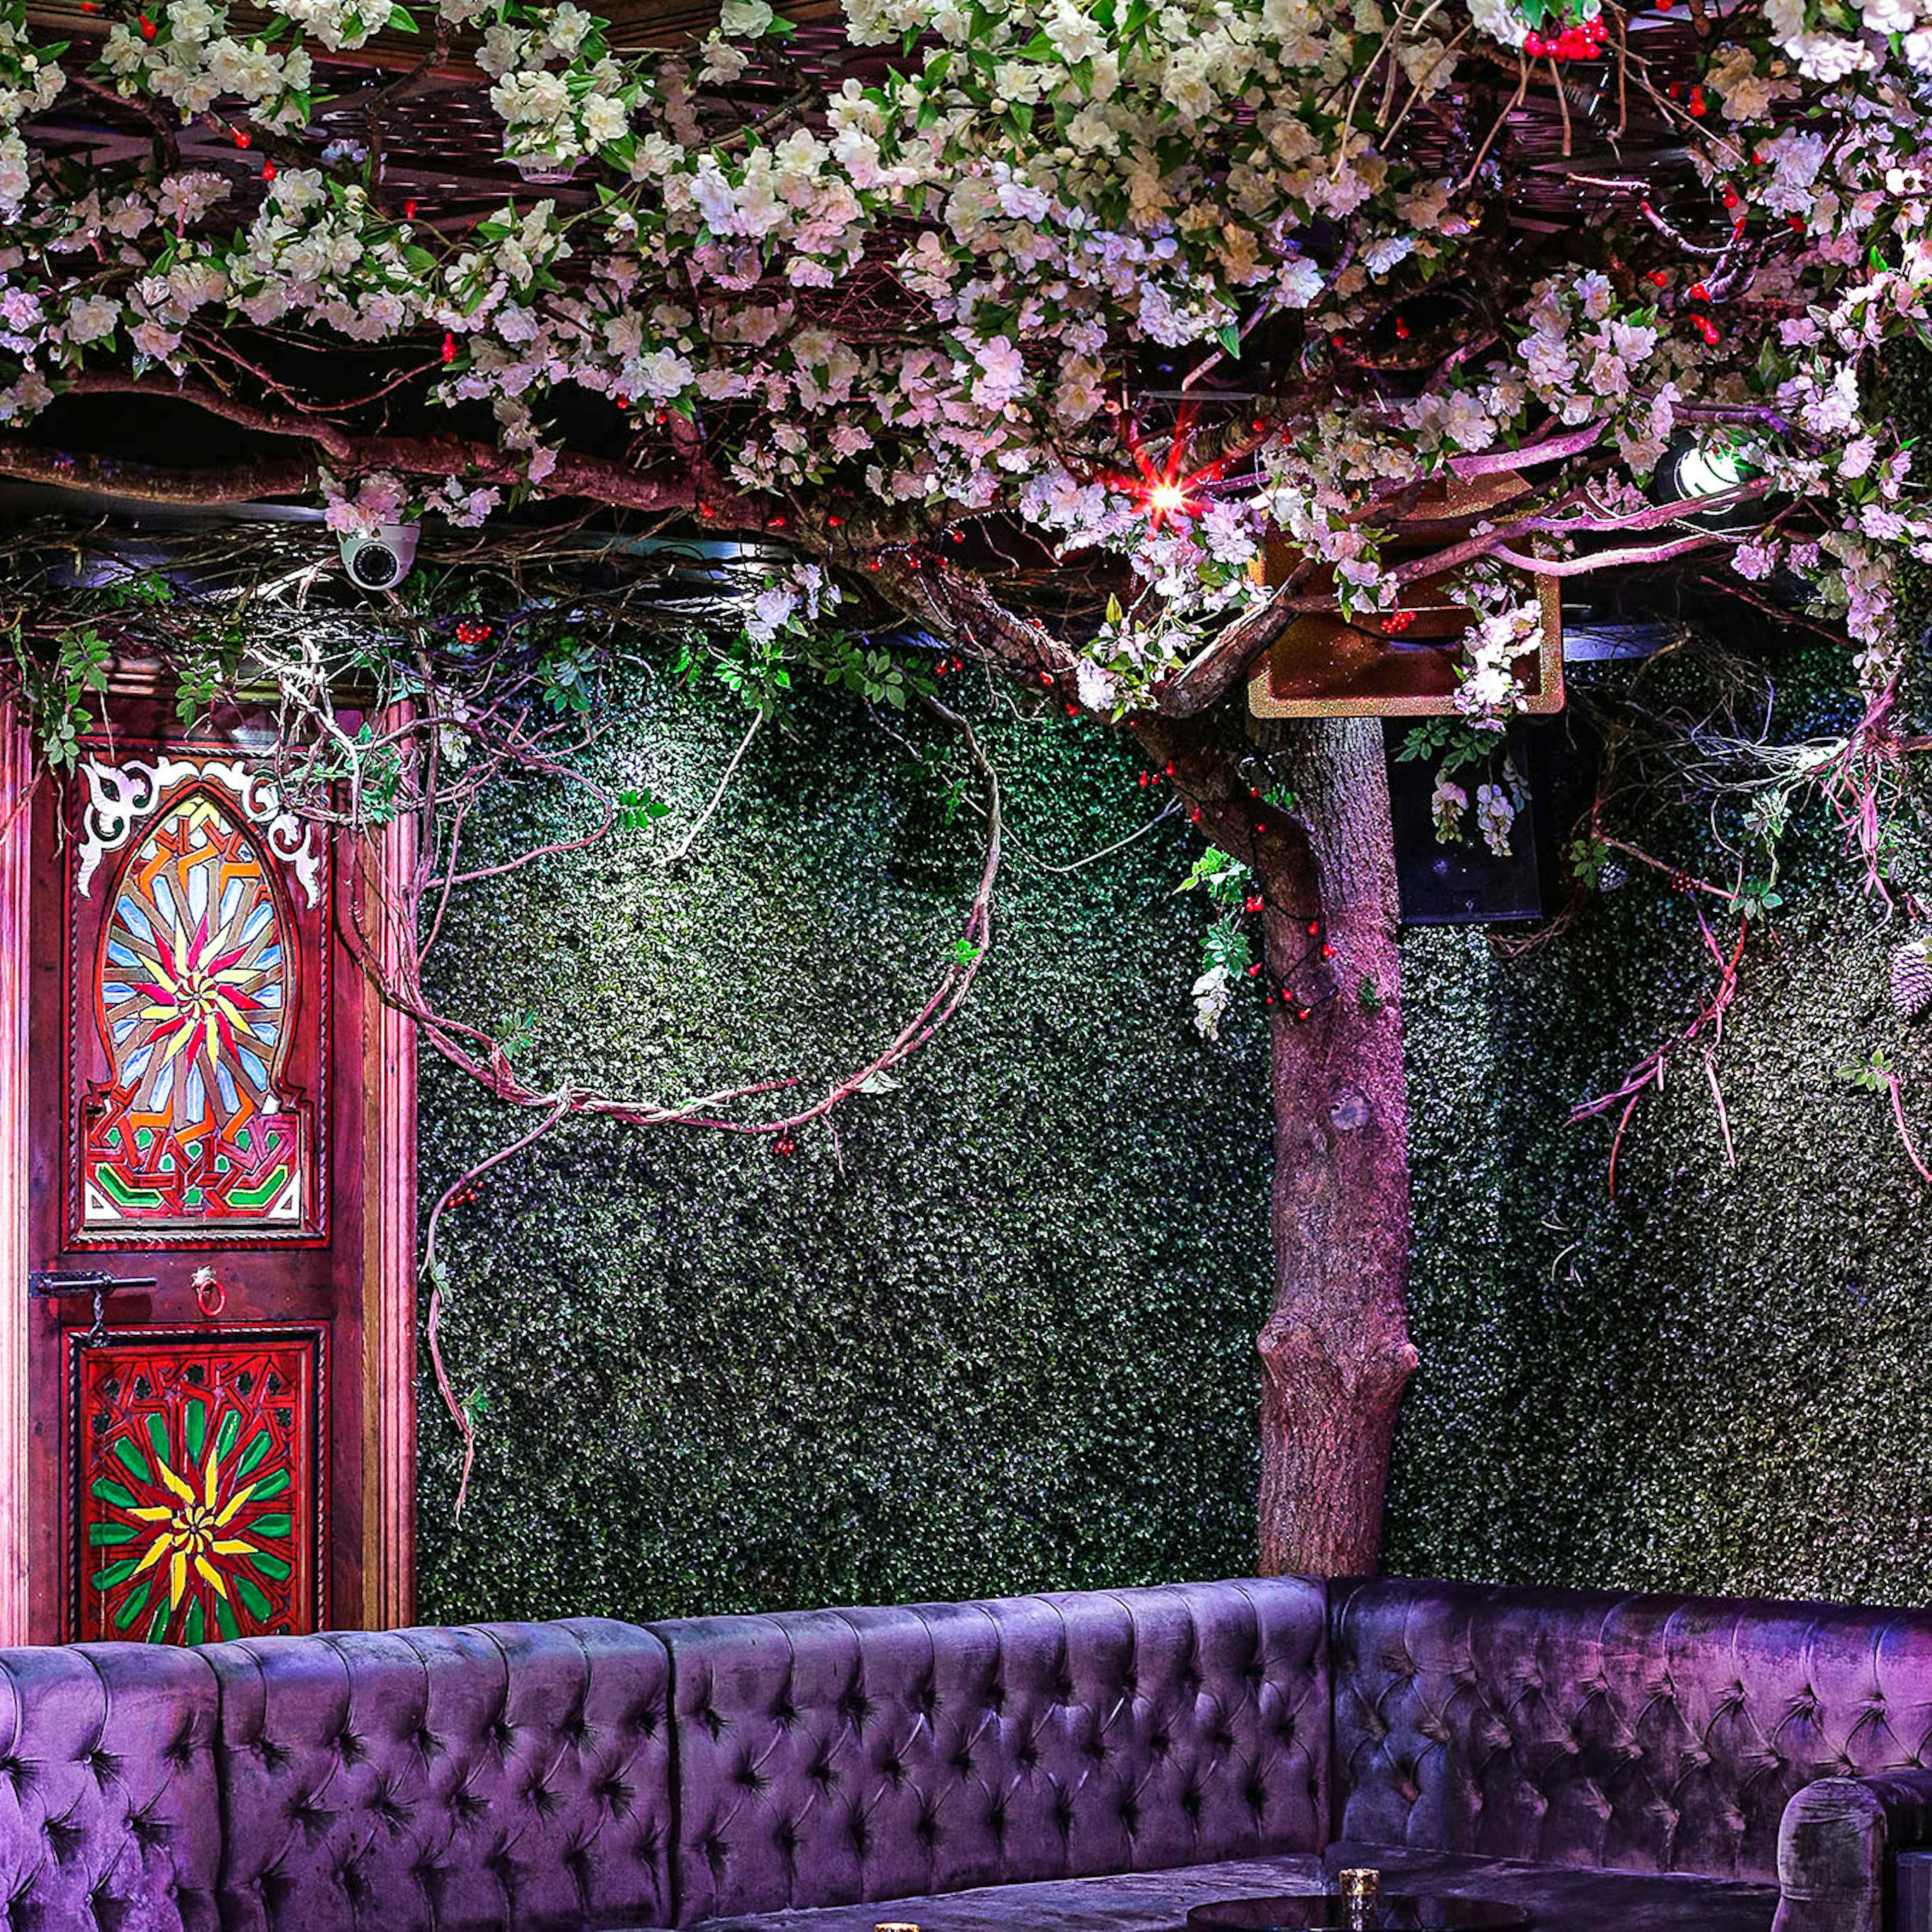 The Cuckoo Club - Downstairs image 2